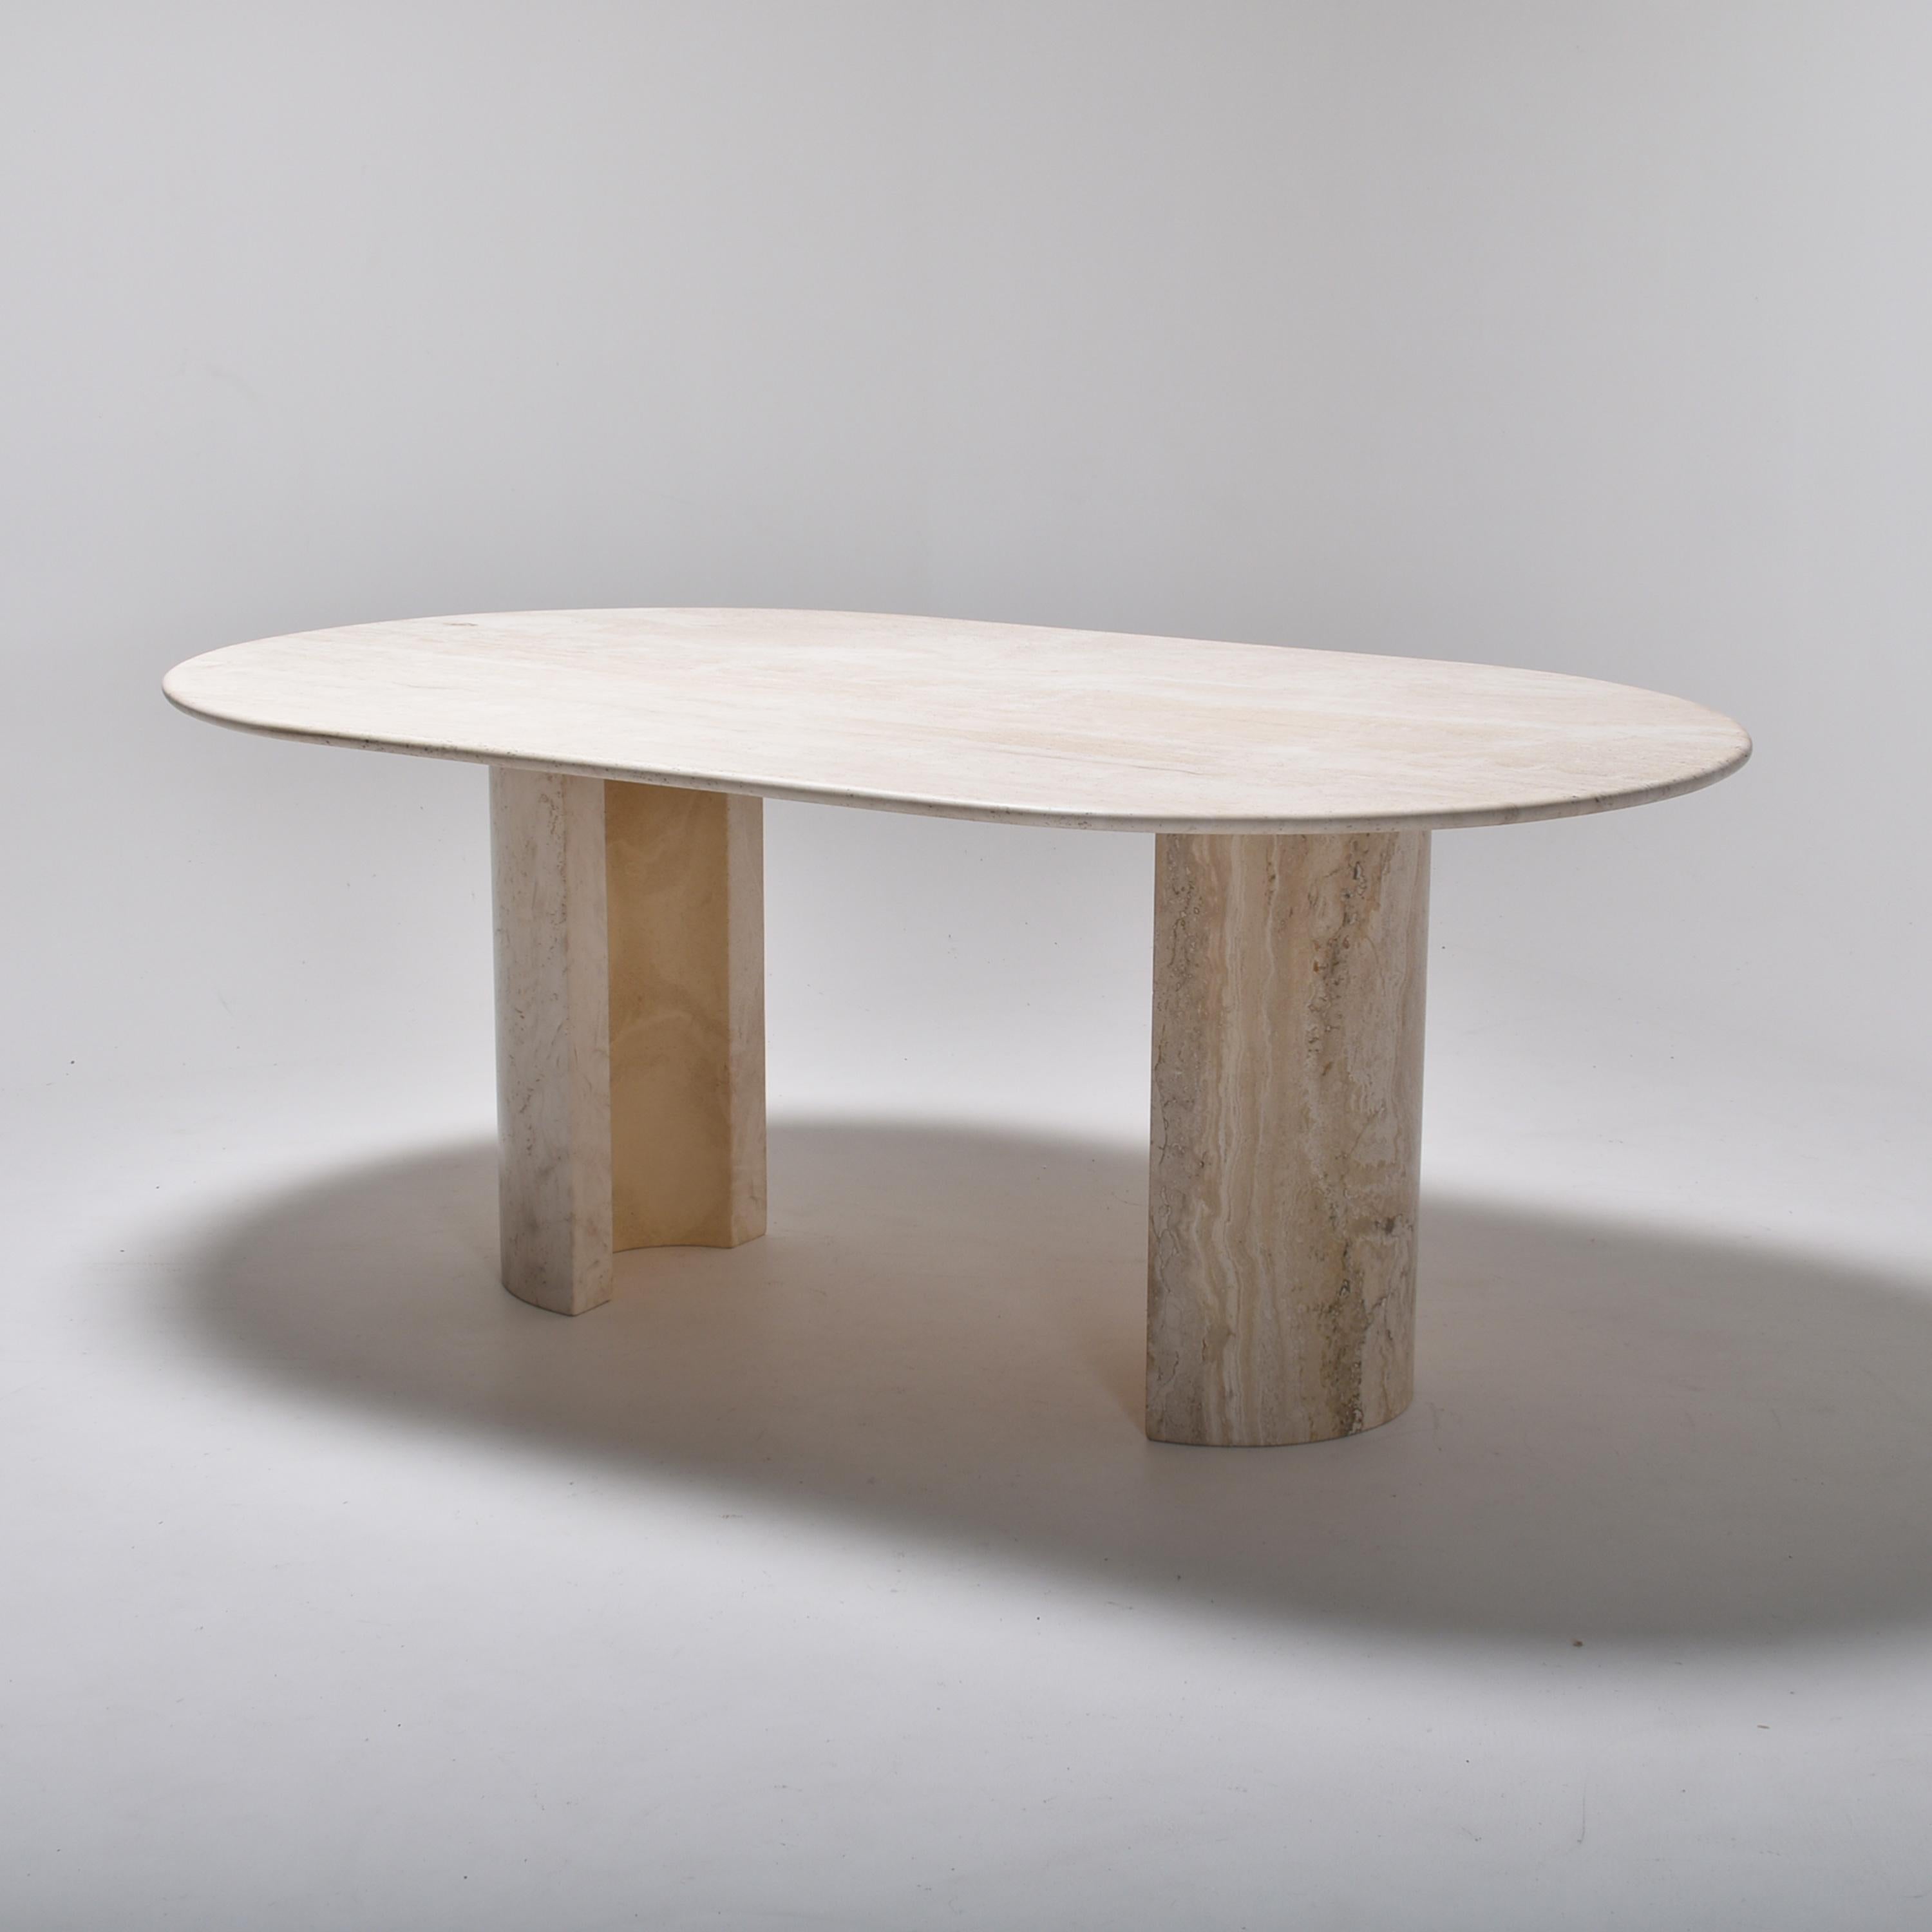 Midcentury dining table in cream travertine, made in Italy.
The oval tabletop lies on two half circles legs. The tabletop and the legs are of solid travertine, in a nice cream tone.
This post modernist work is typical of the Italian